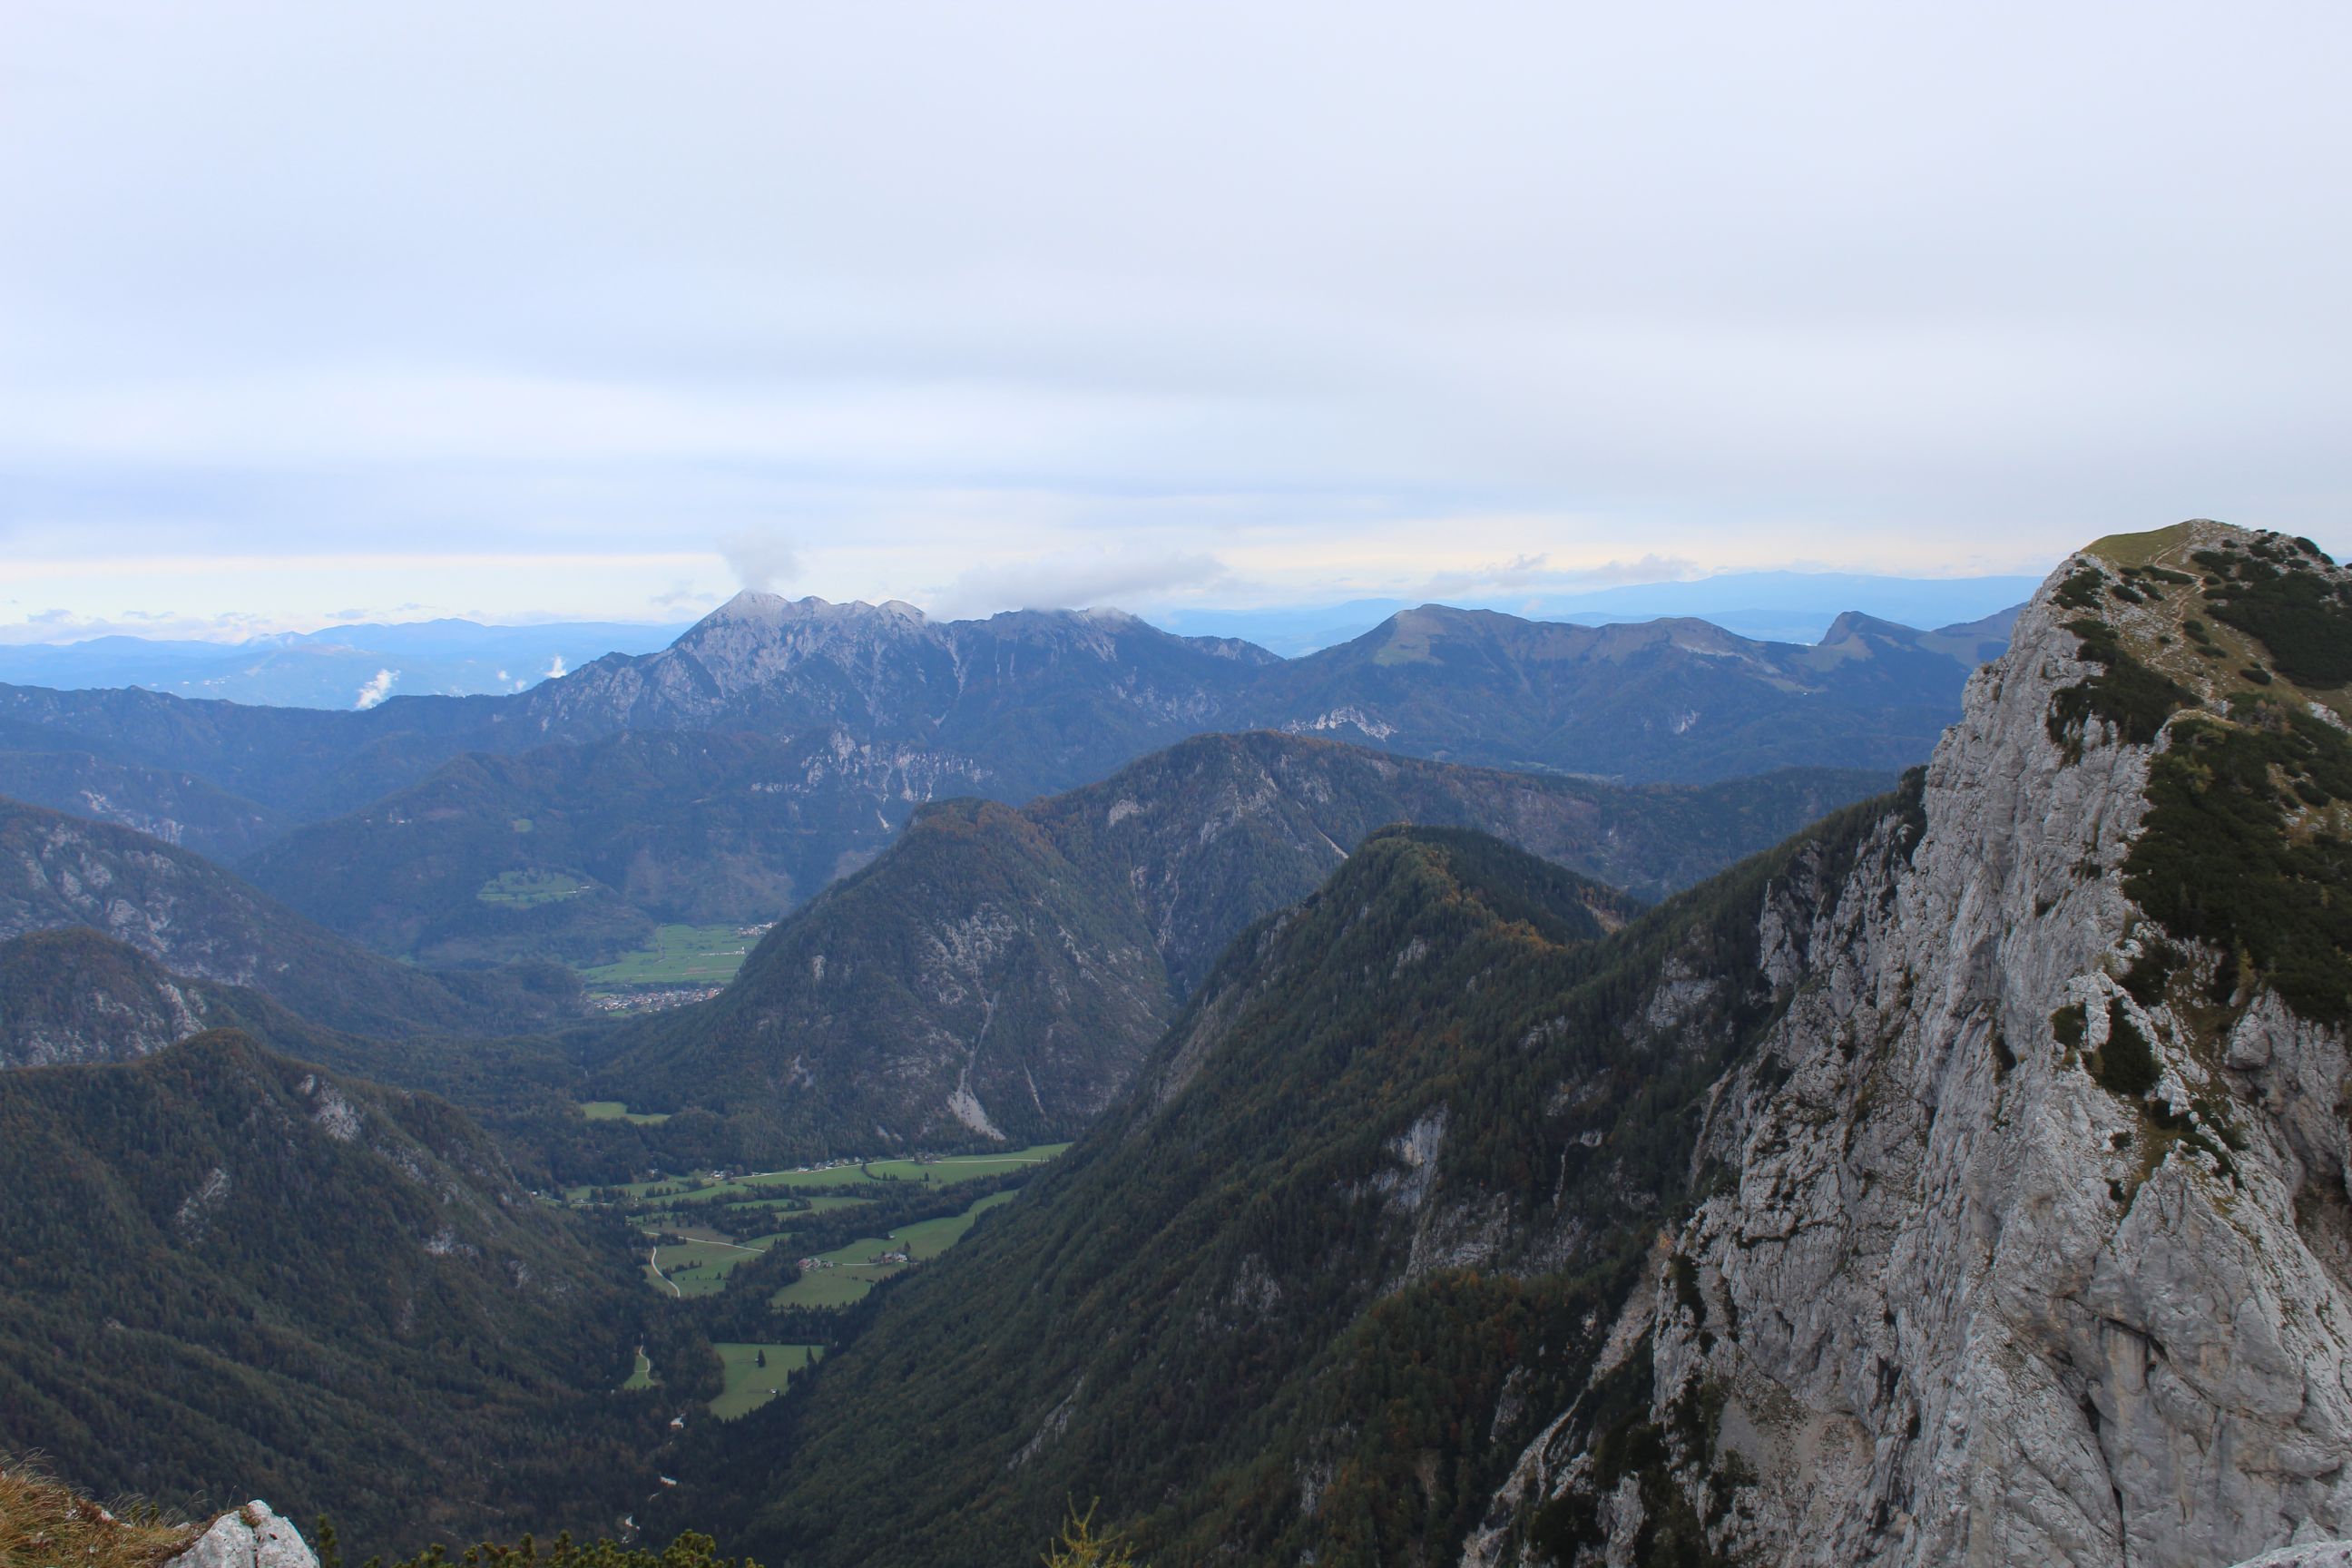 A panoramic view of mountains, taken from the summit of Mount Brda in Slovenia